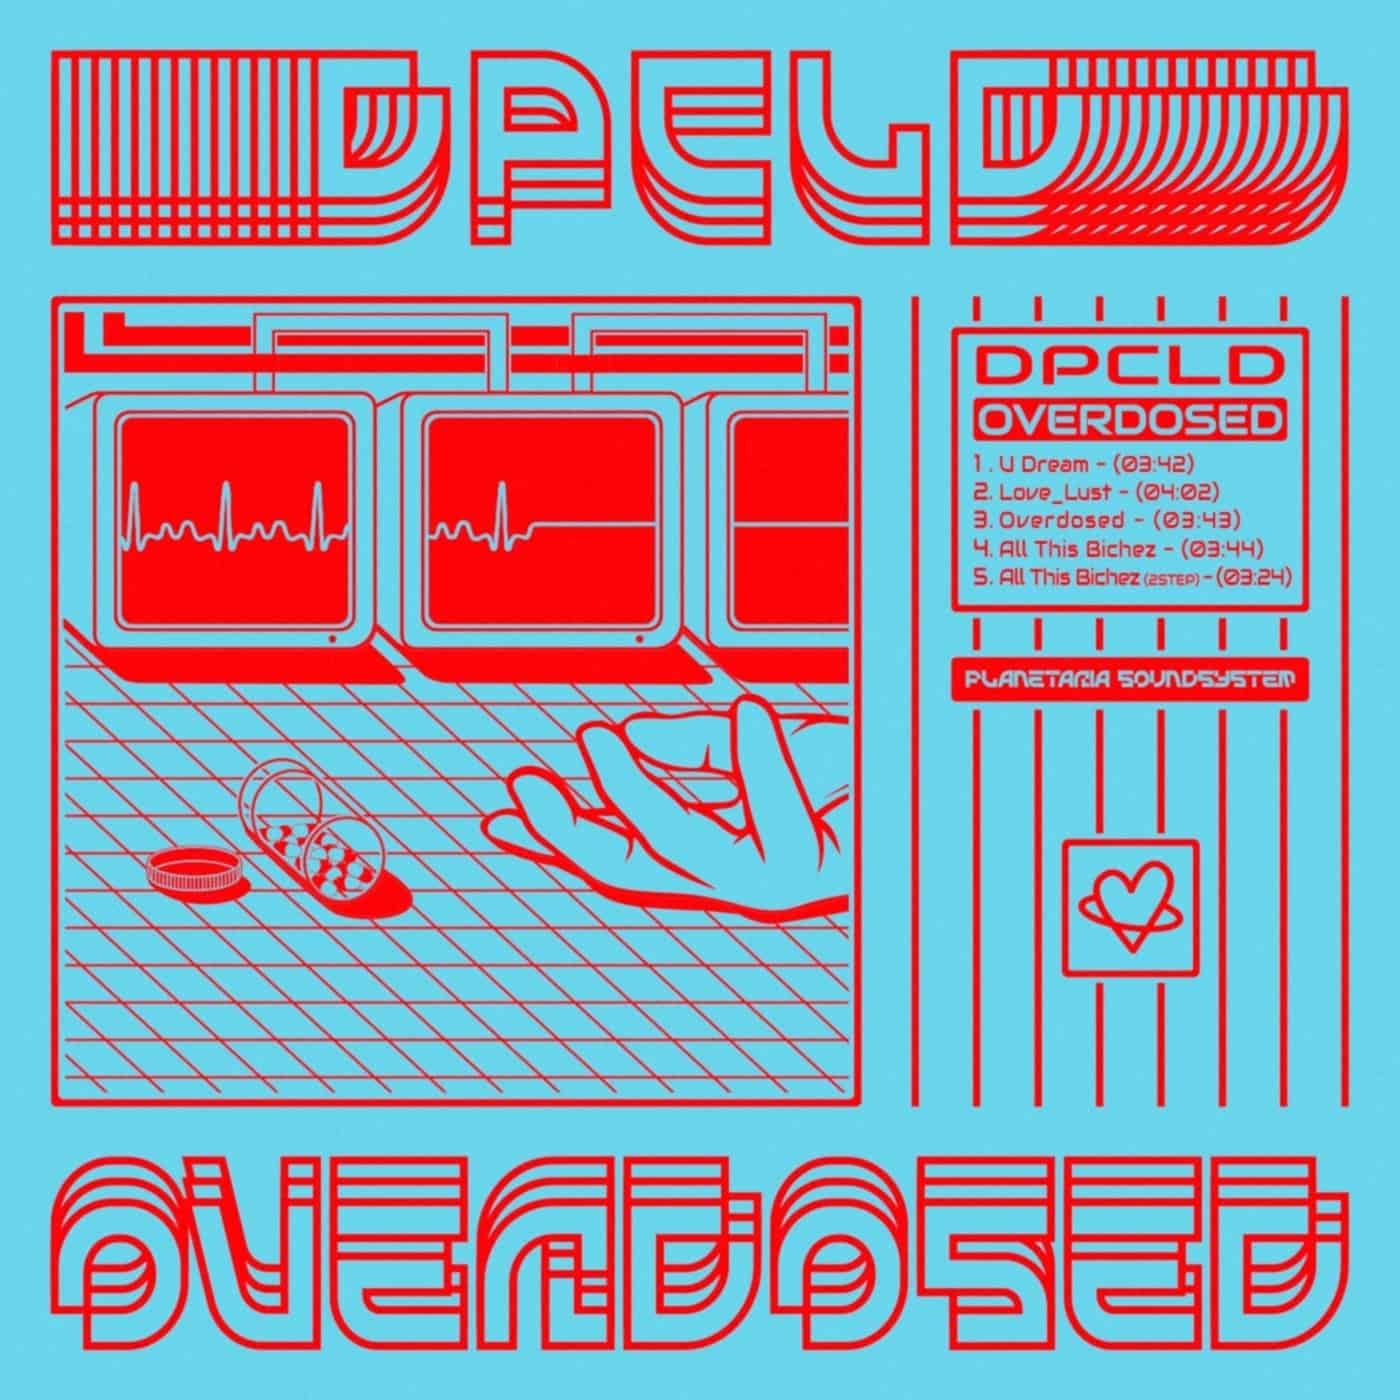 Download dpcld - Overdosed on Electrobuzz